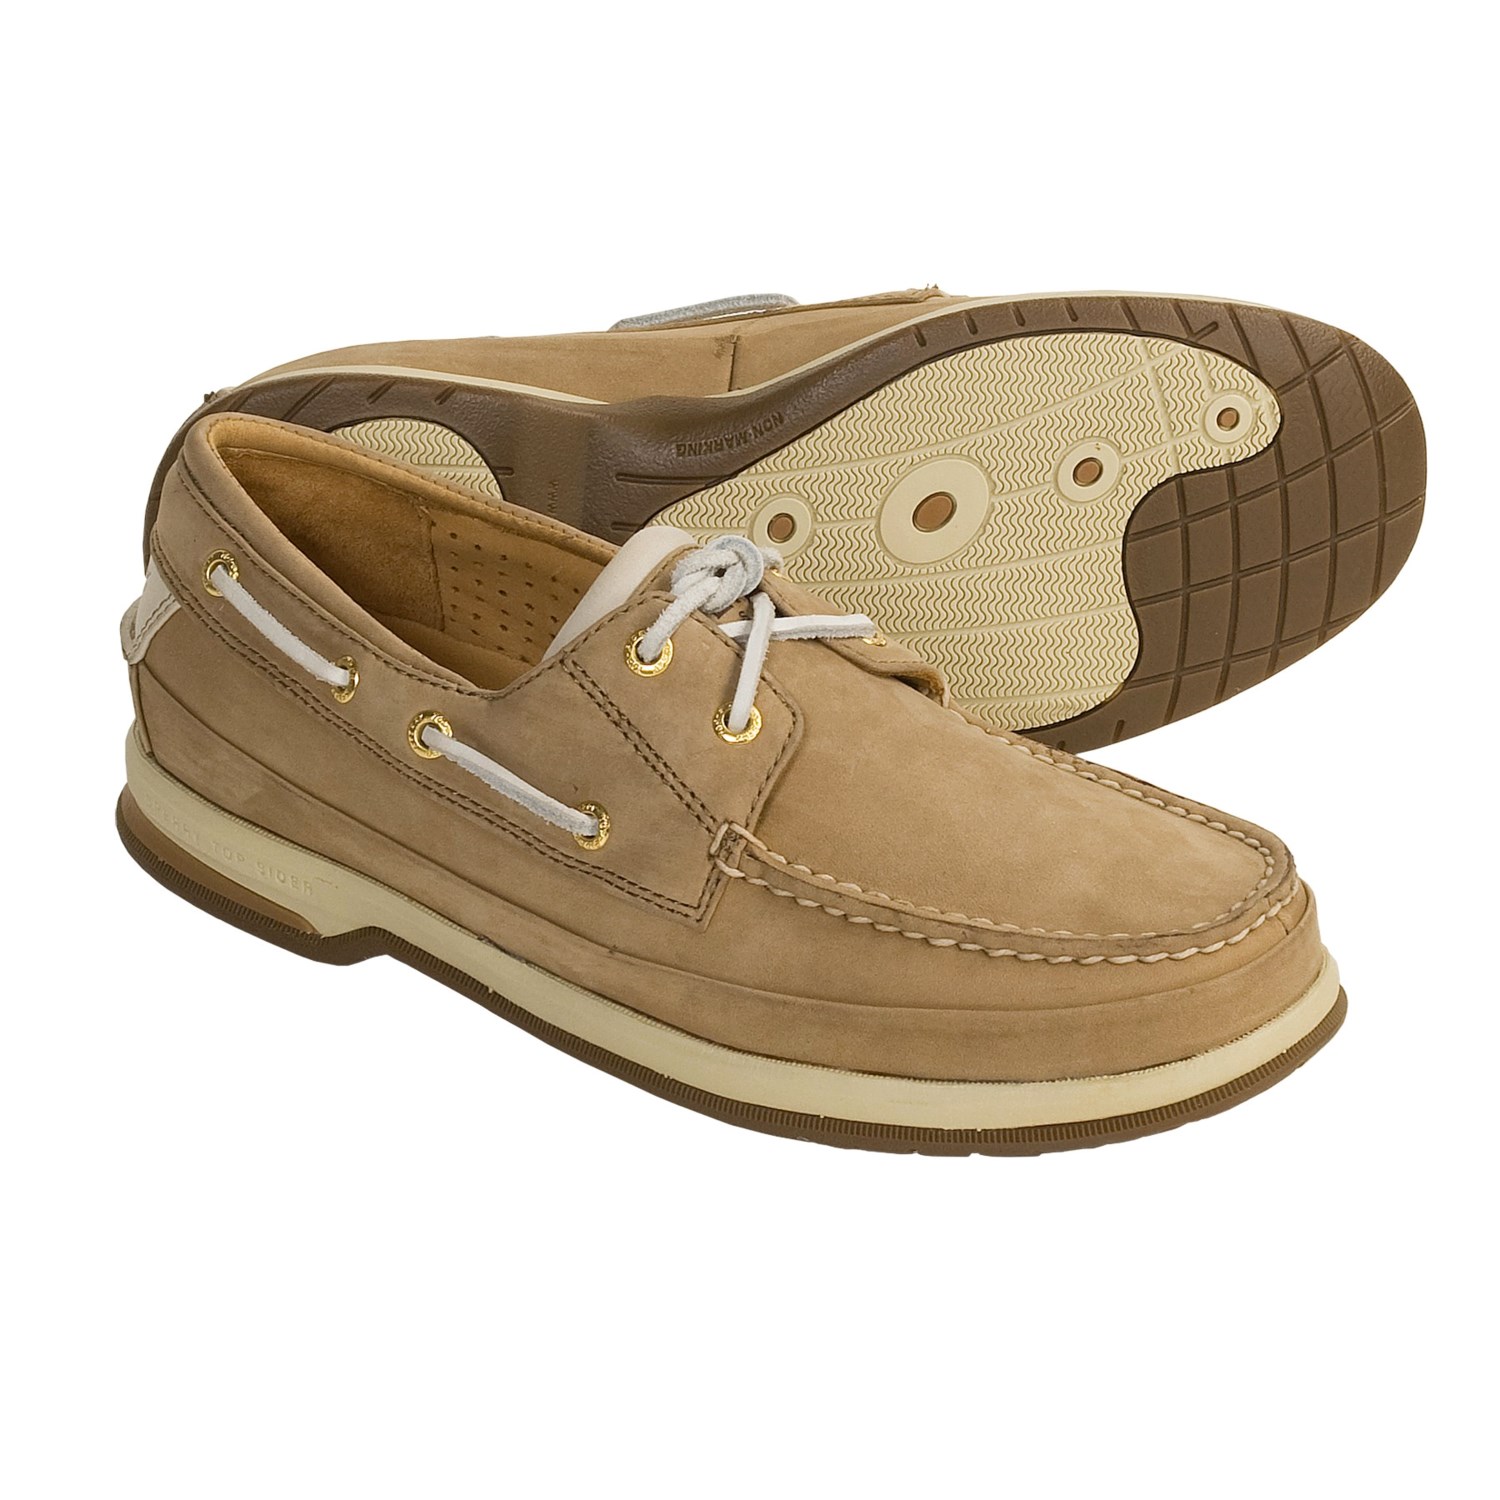 Sperry Top-Sider Gold Cup Greige Boat Shoes (For Men) 2575C